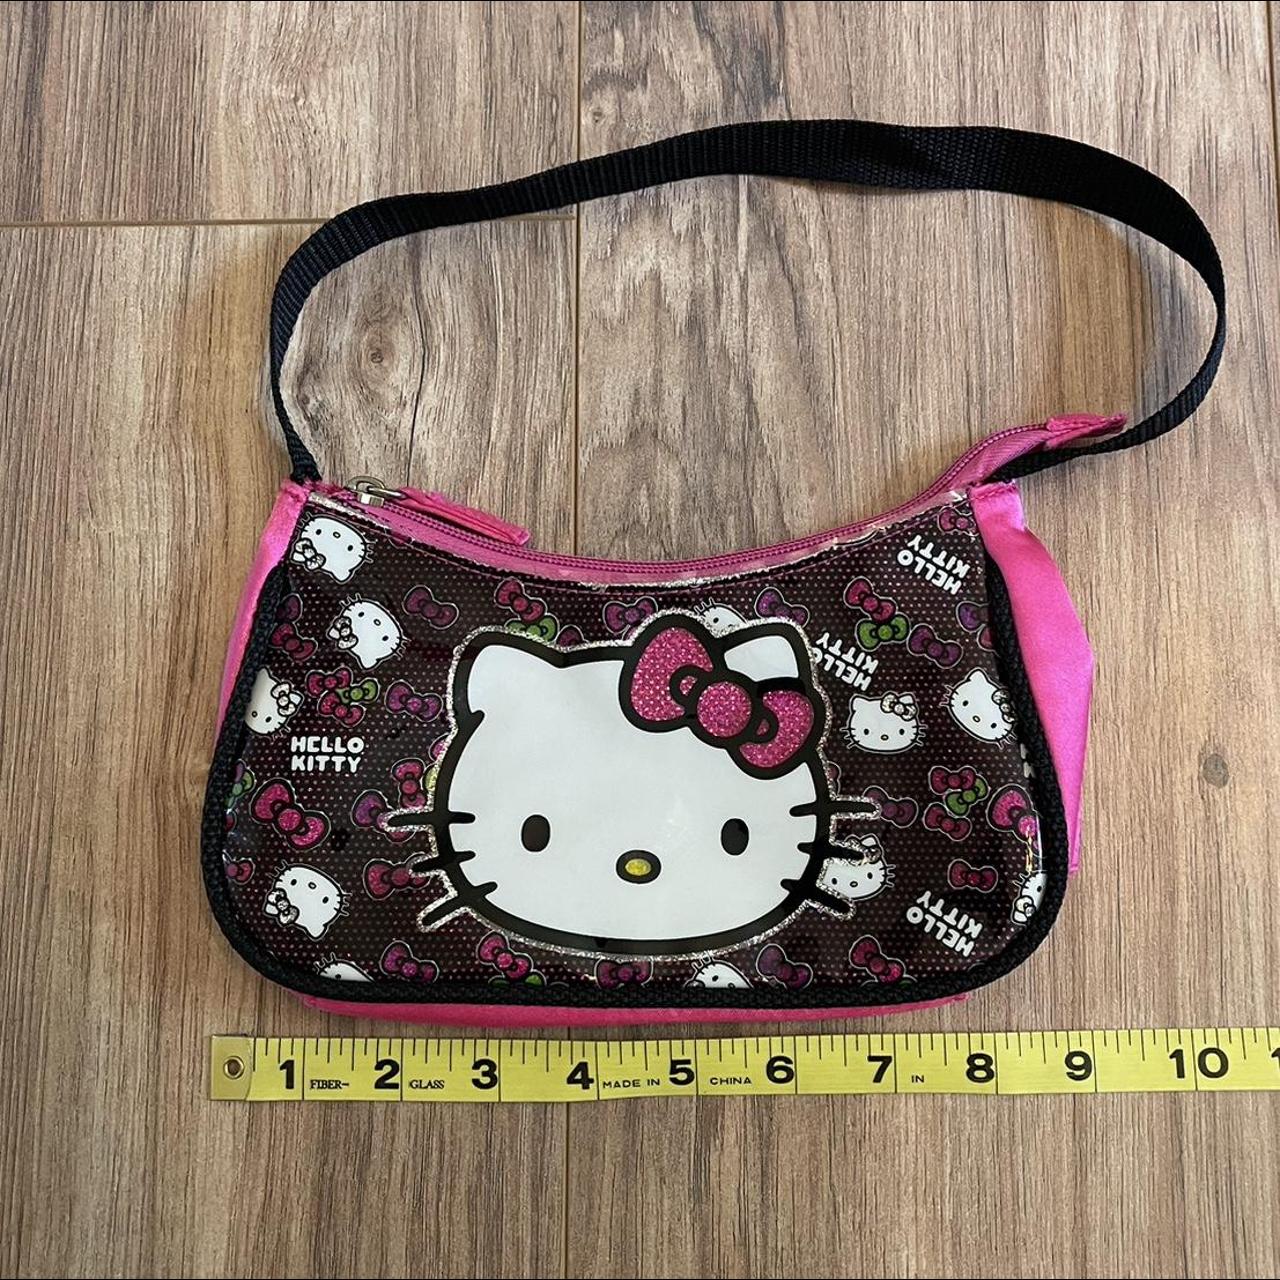 Hello Kitty Women's Shoulder Bags - Pink